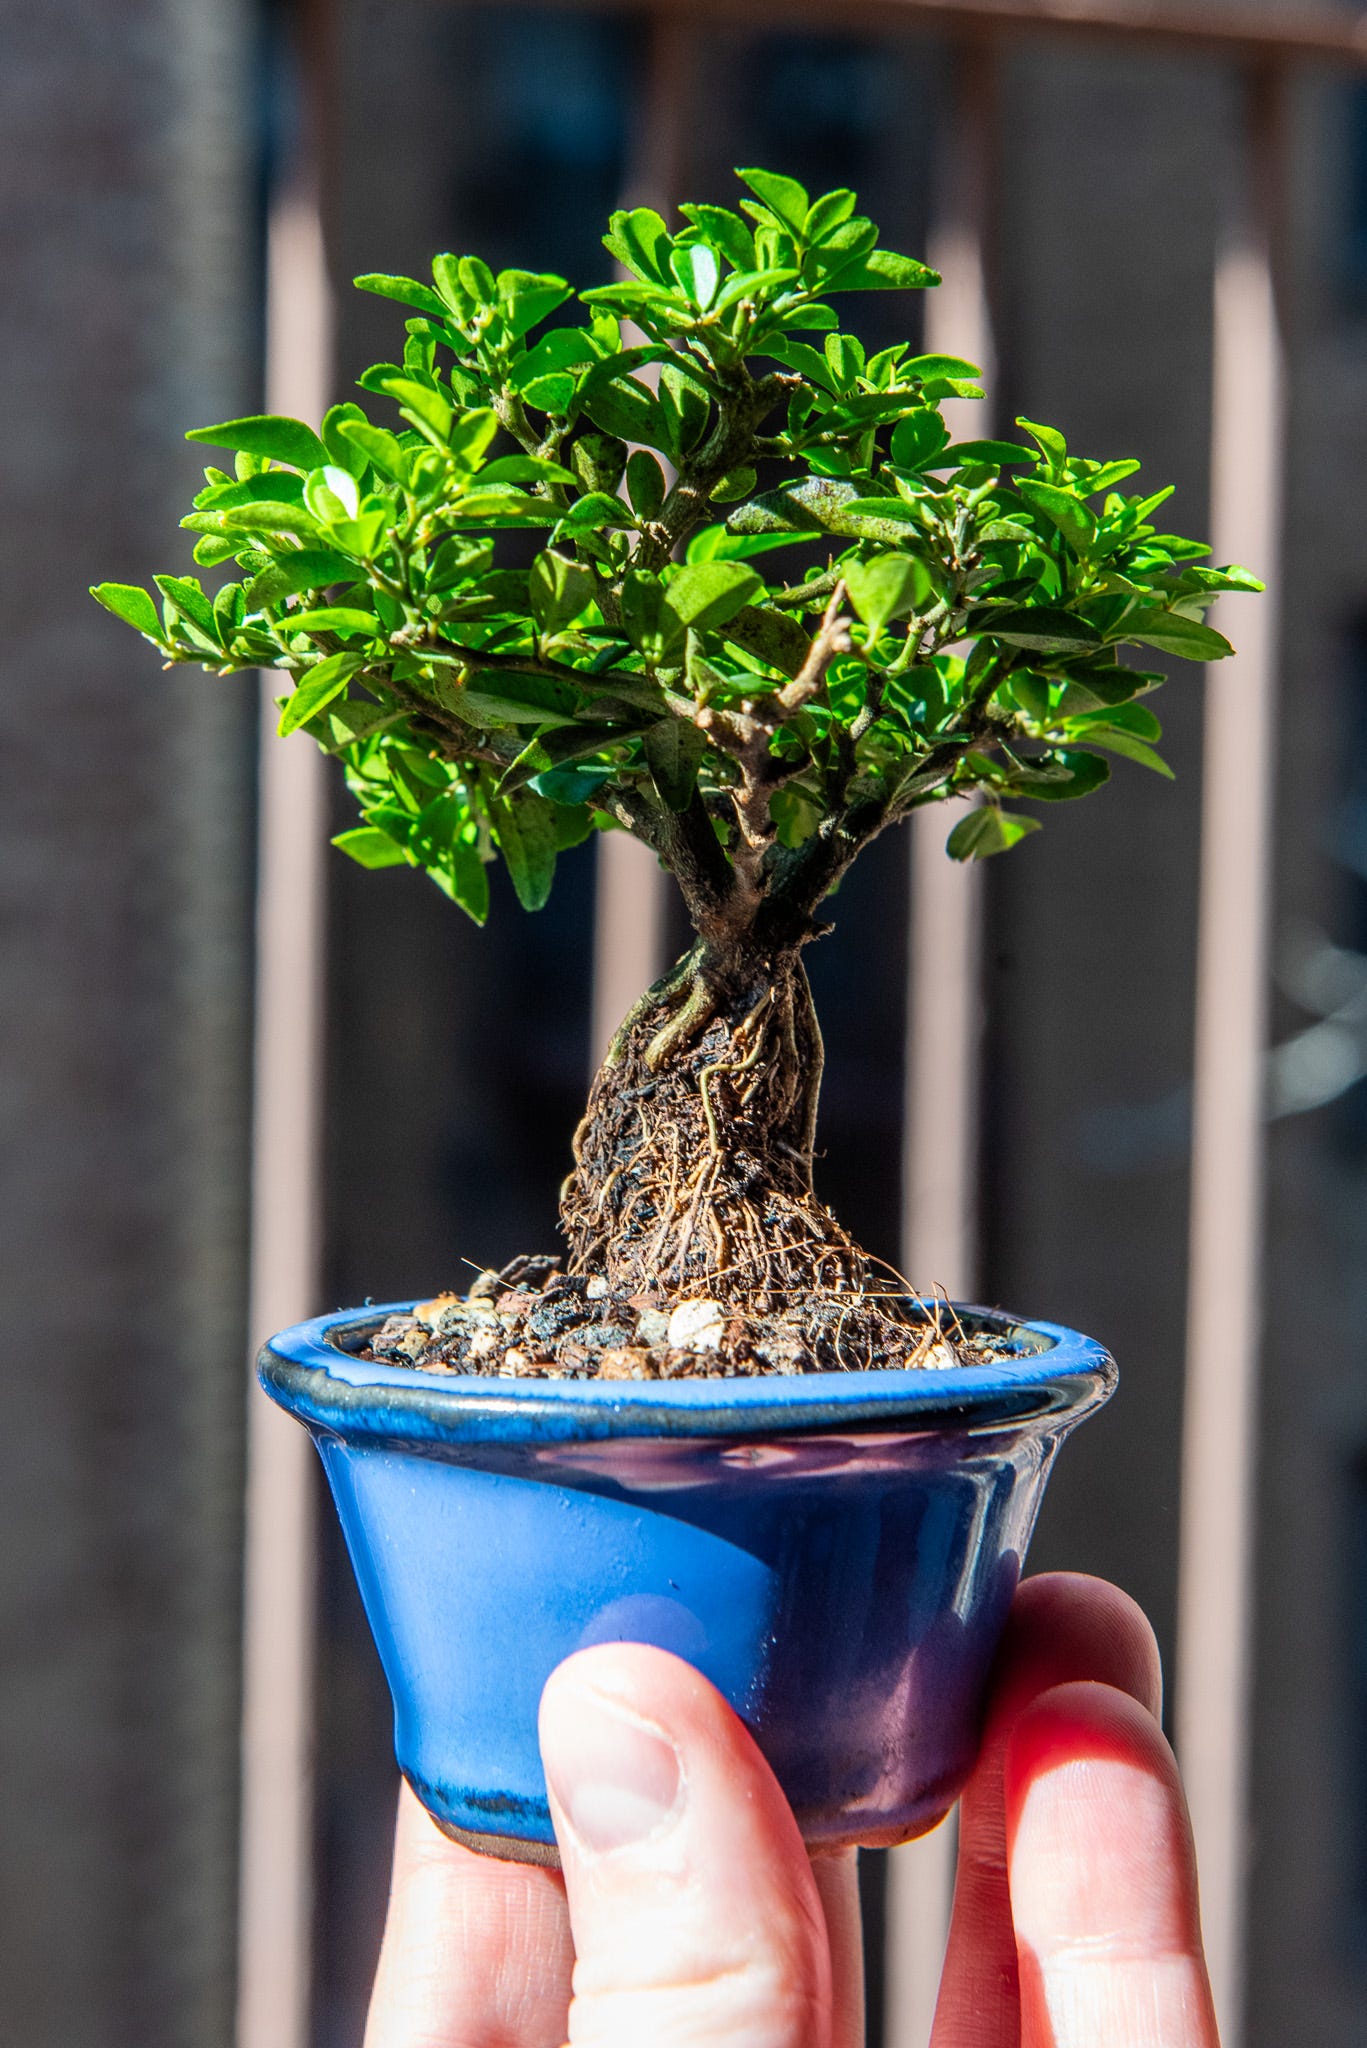 ID: Tiny triphasia bonsai held in my fingertips